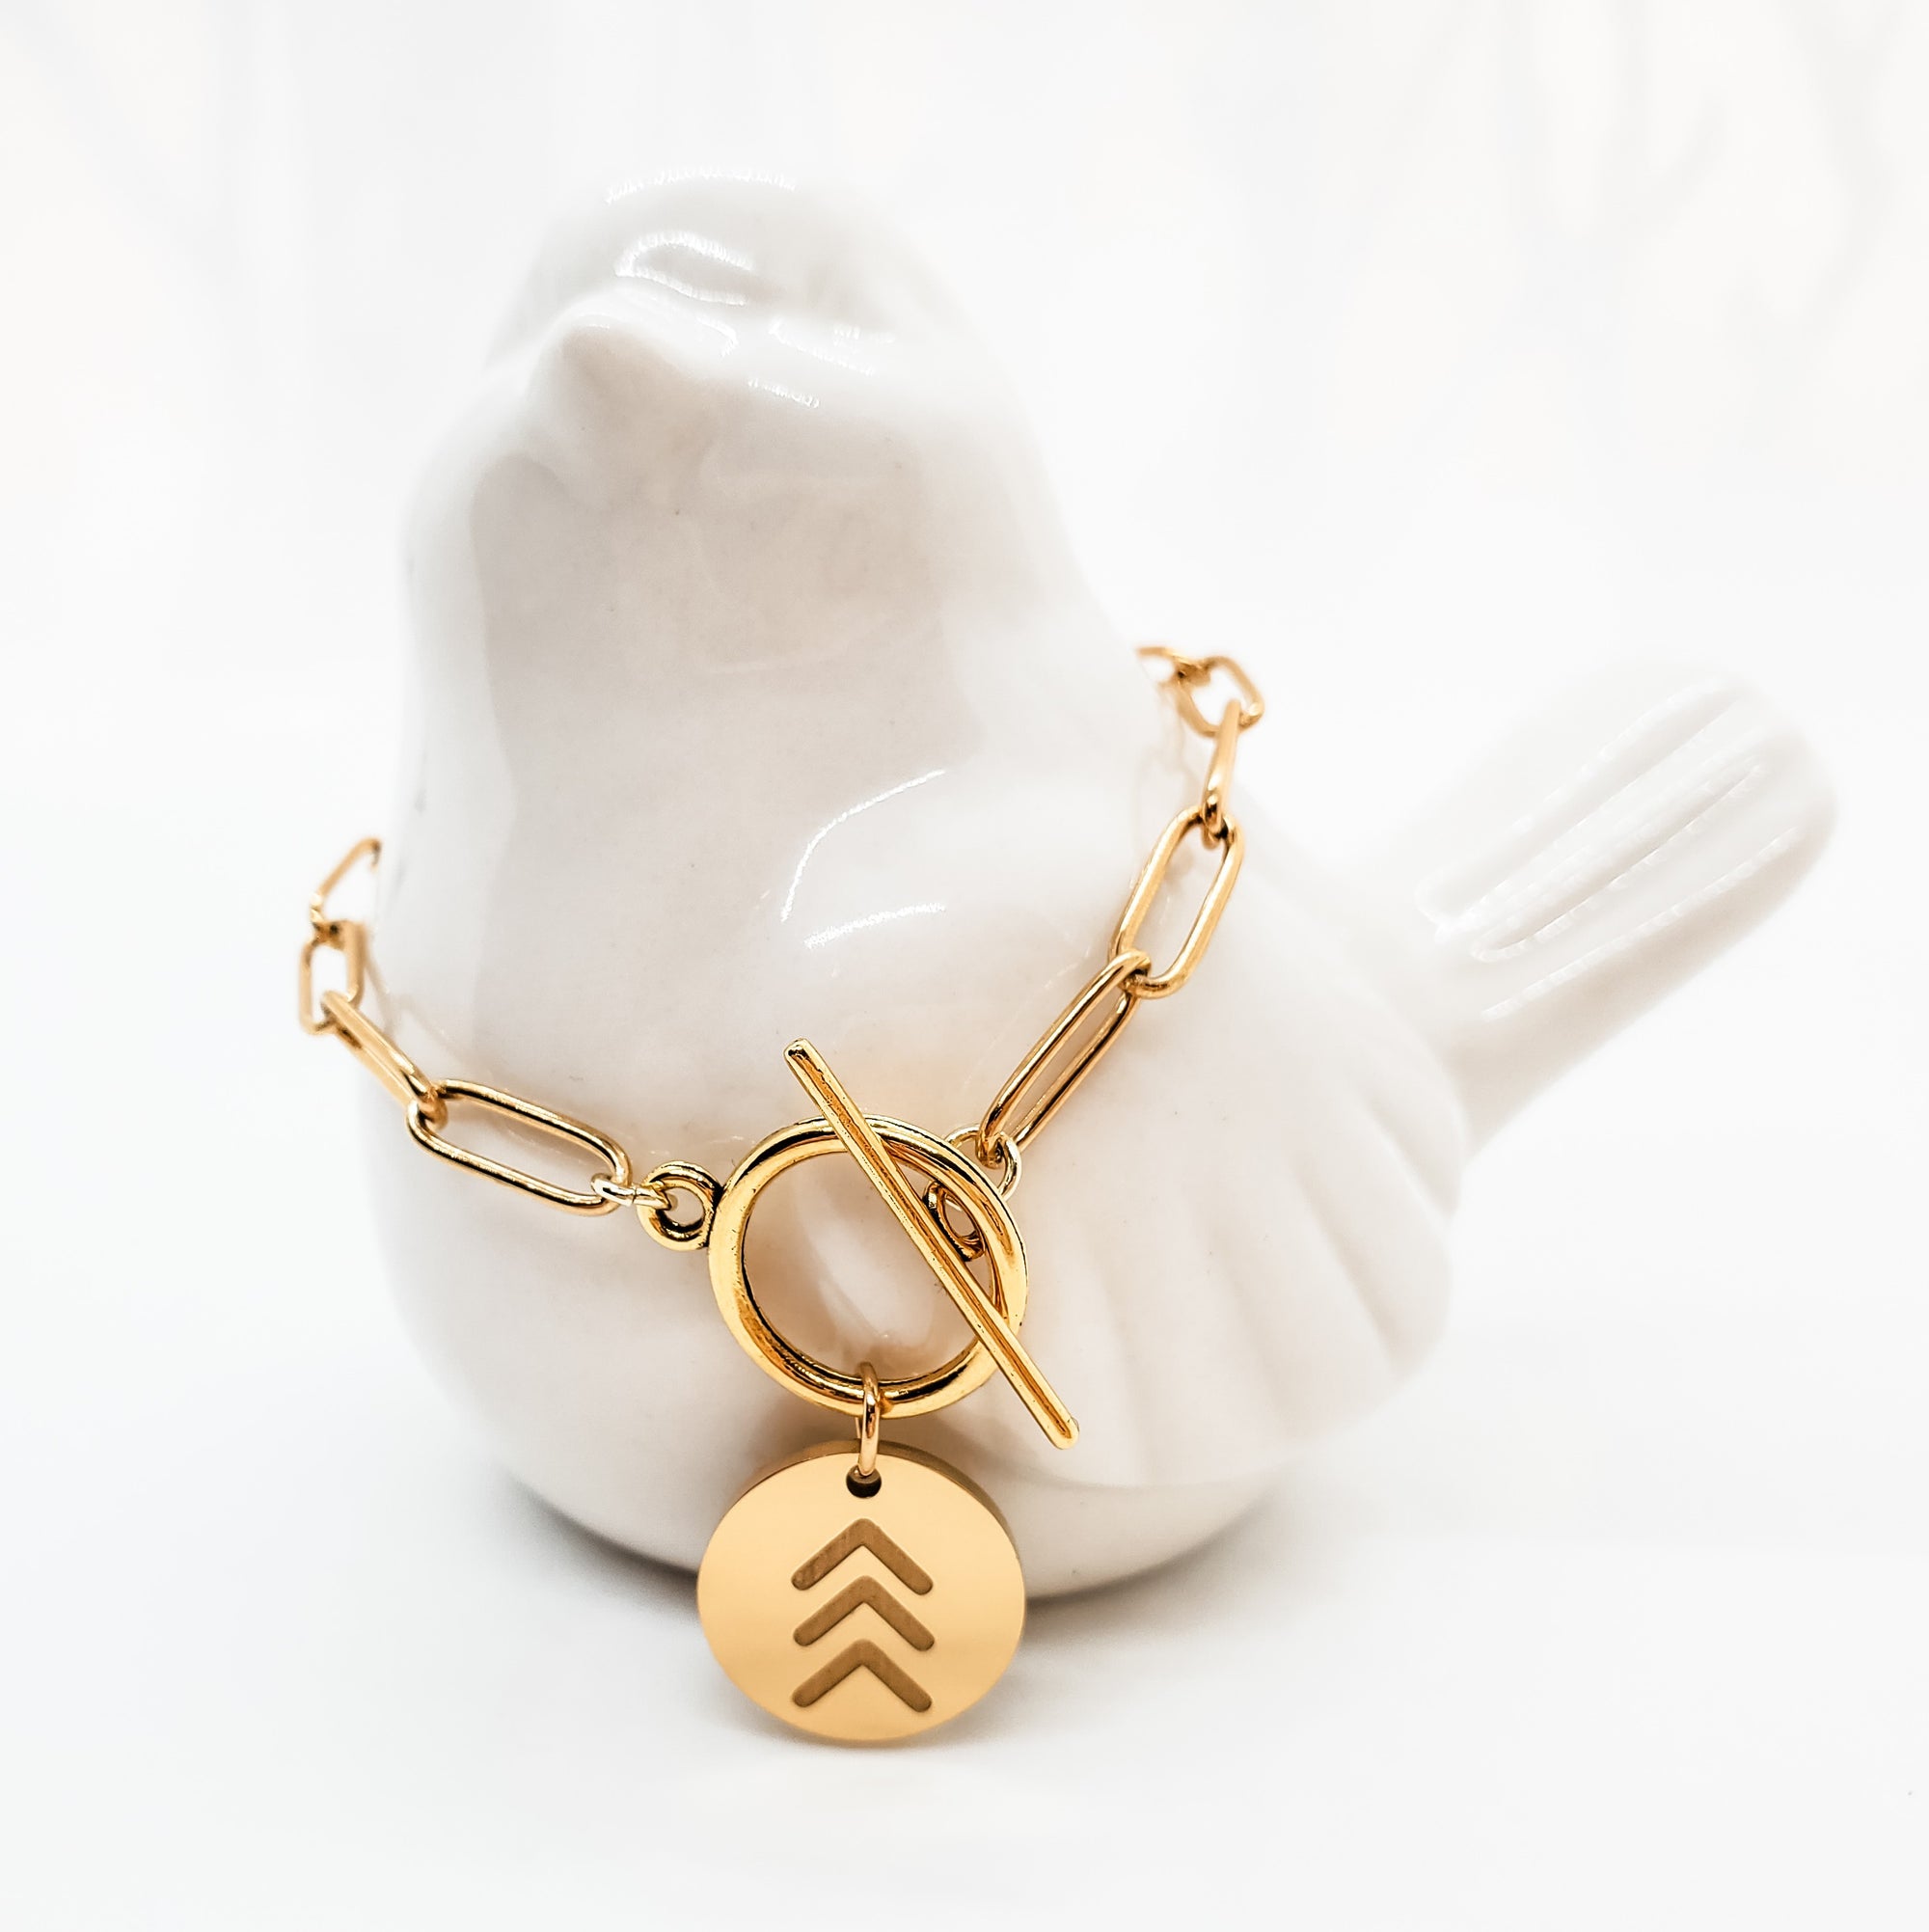 Trending paperclip bracelet with circle clasp and gold chevron Lucky Few charm - Down Syndrome Boutique